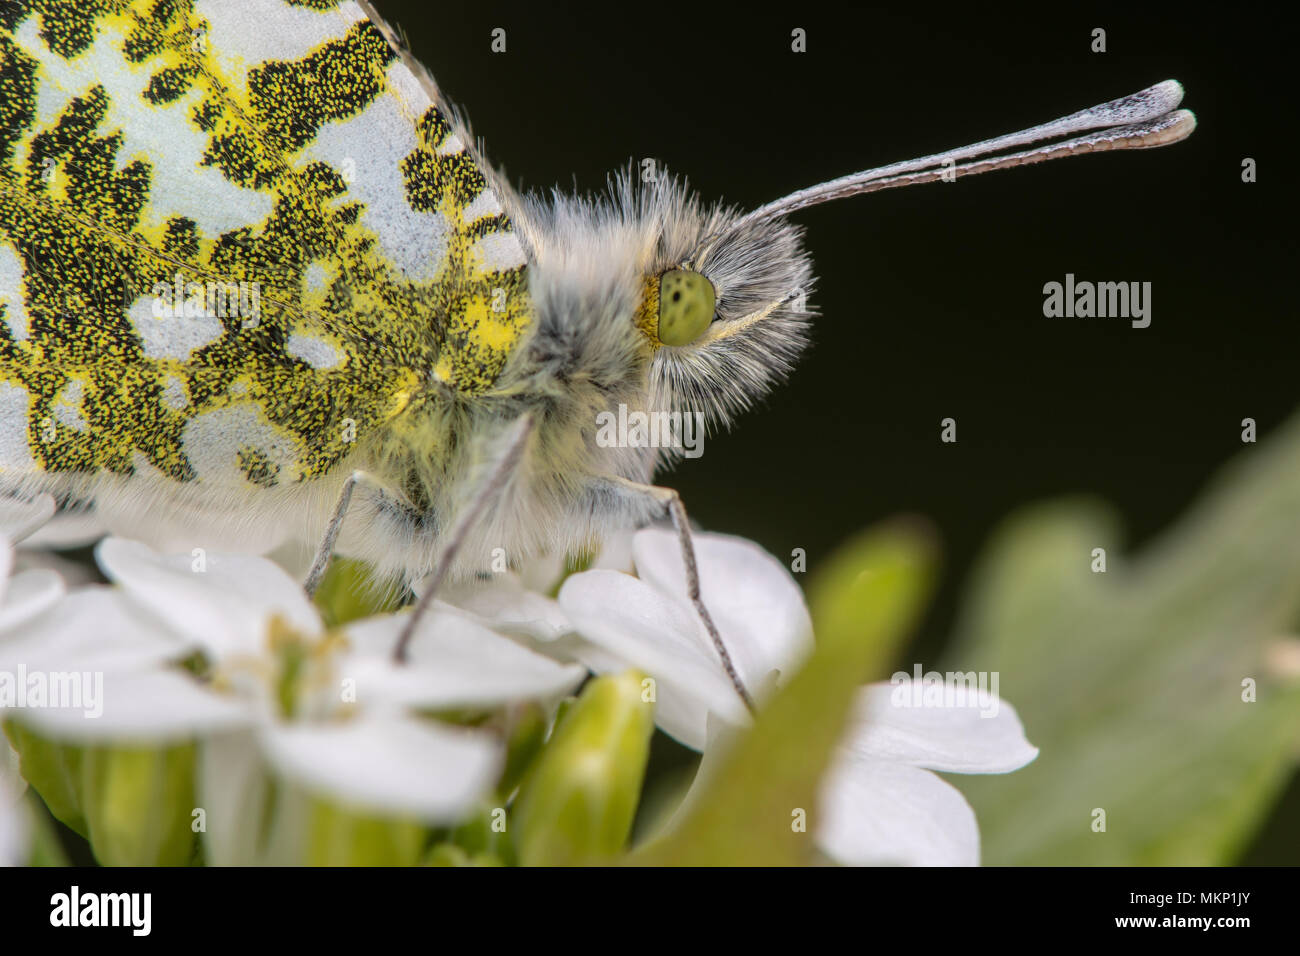 Orange-tip butterfly (Anthocharis cardamines) close-up. Head and thorax of female butterfly in the family Pieridae, on flowers of garlic mustard Stock Photo